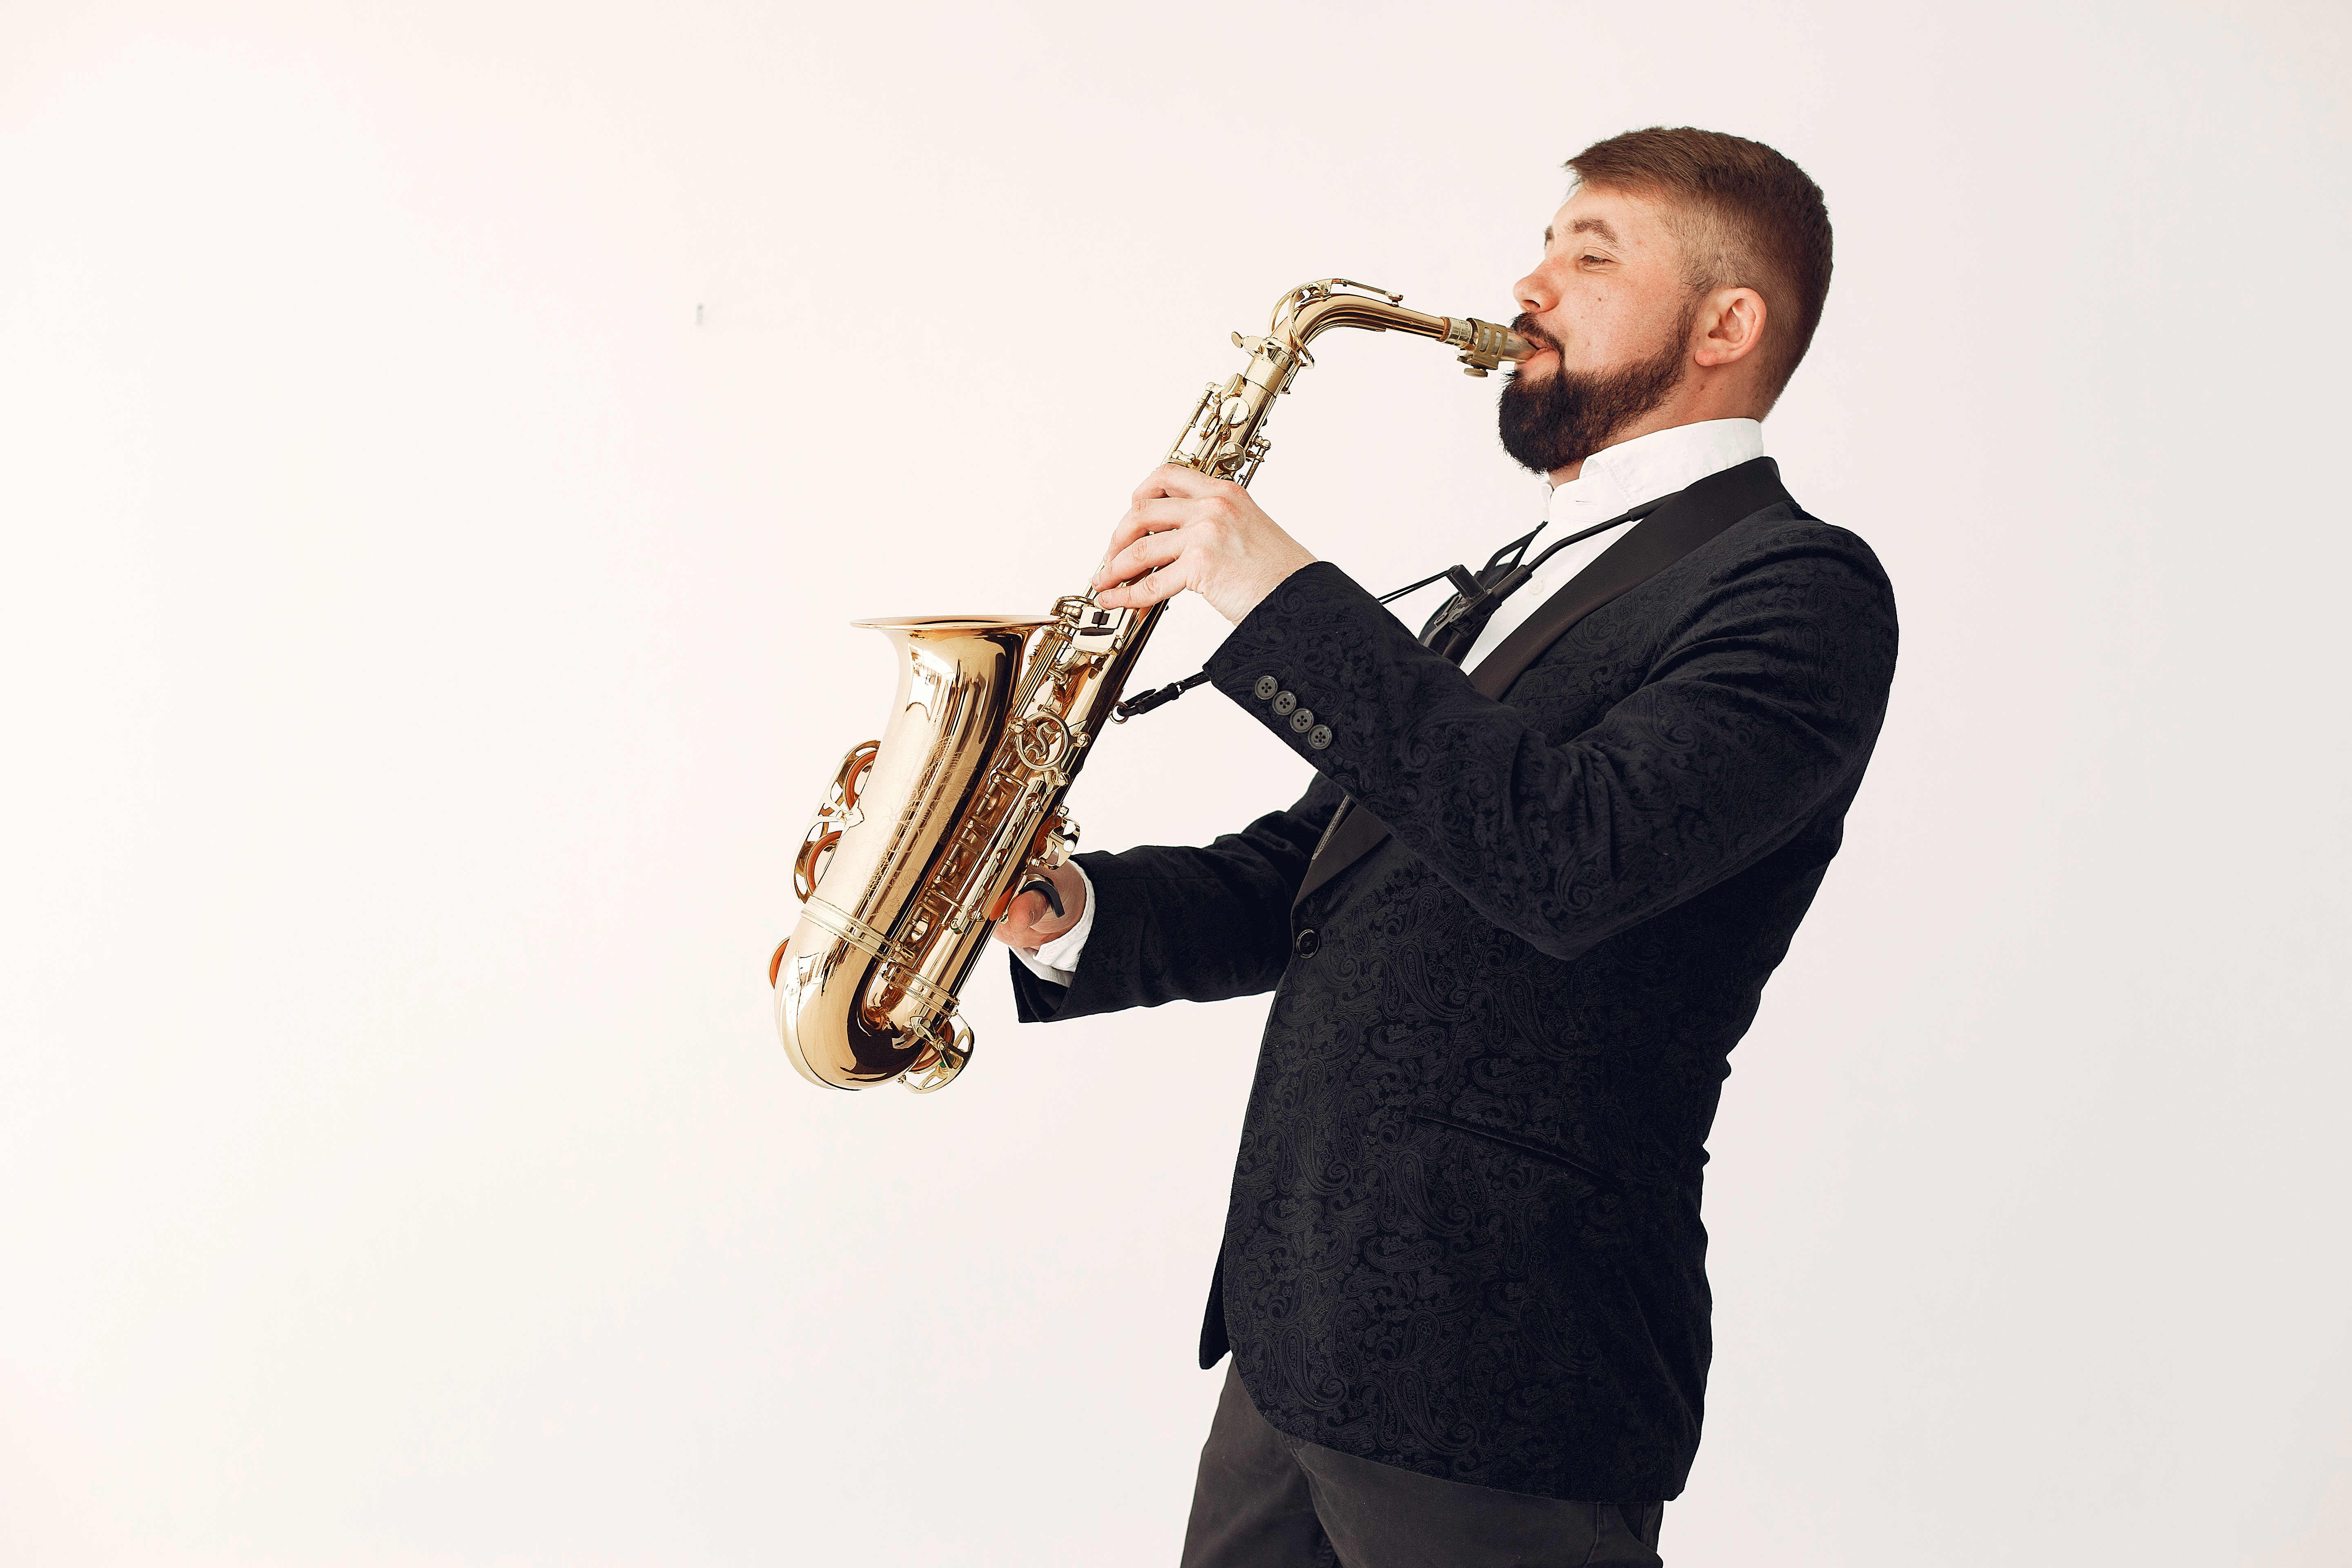 Adult man playing saxophone during rehearsal isolated on white background · Free